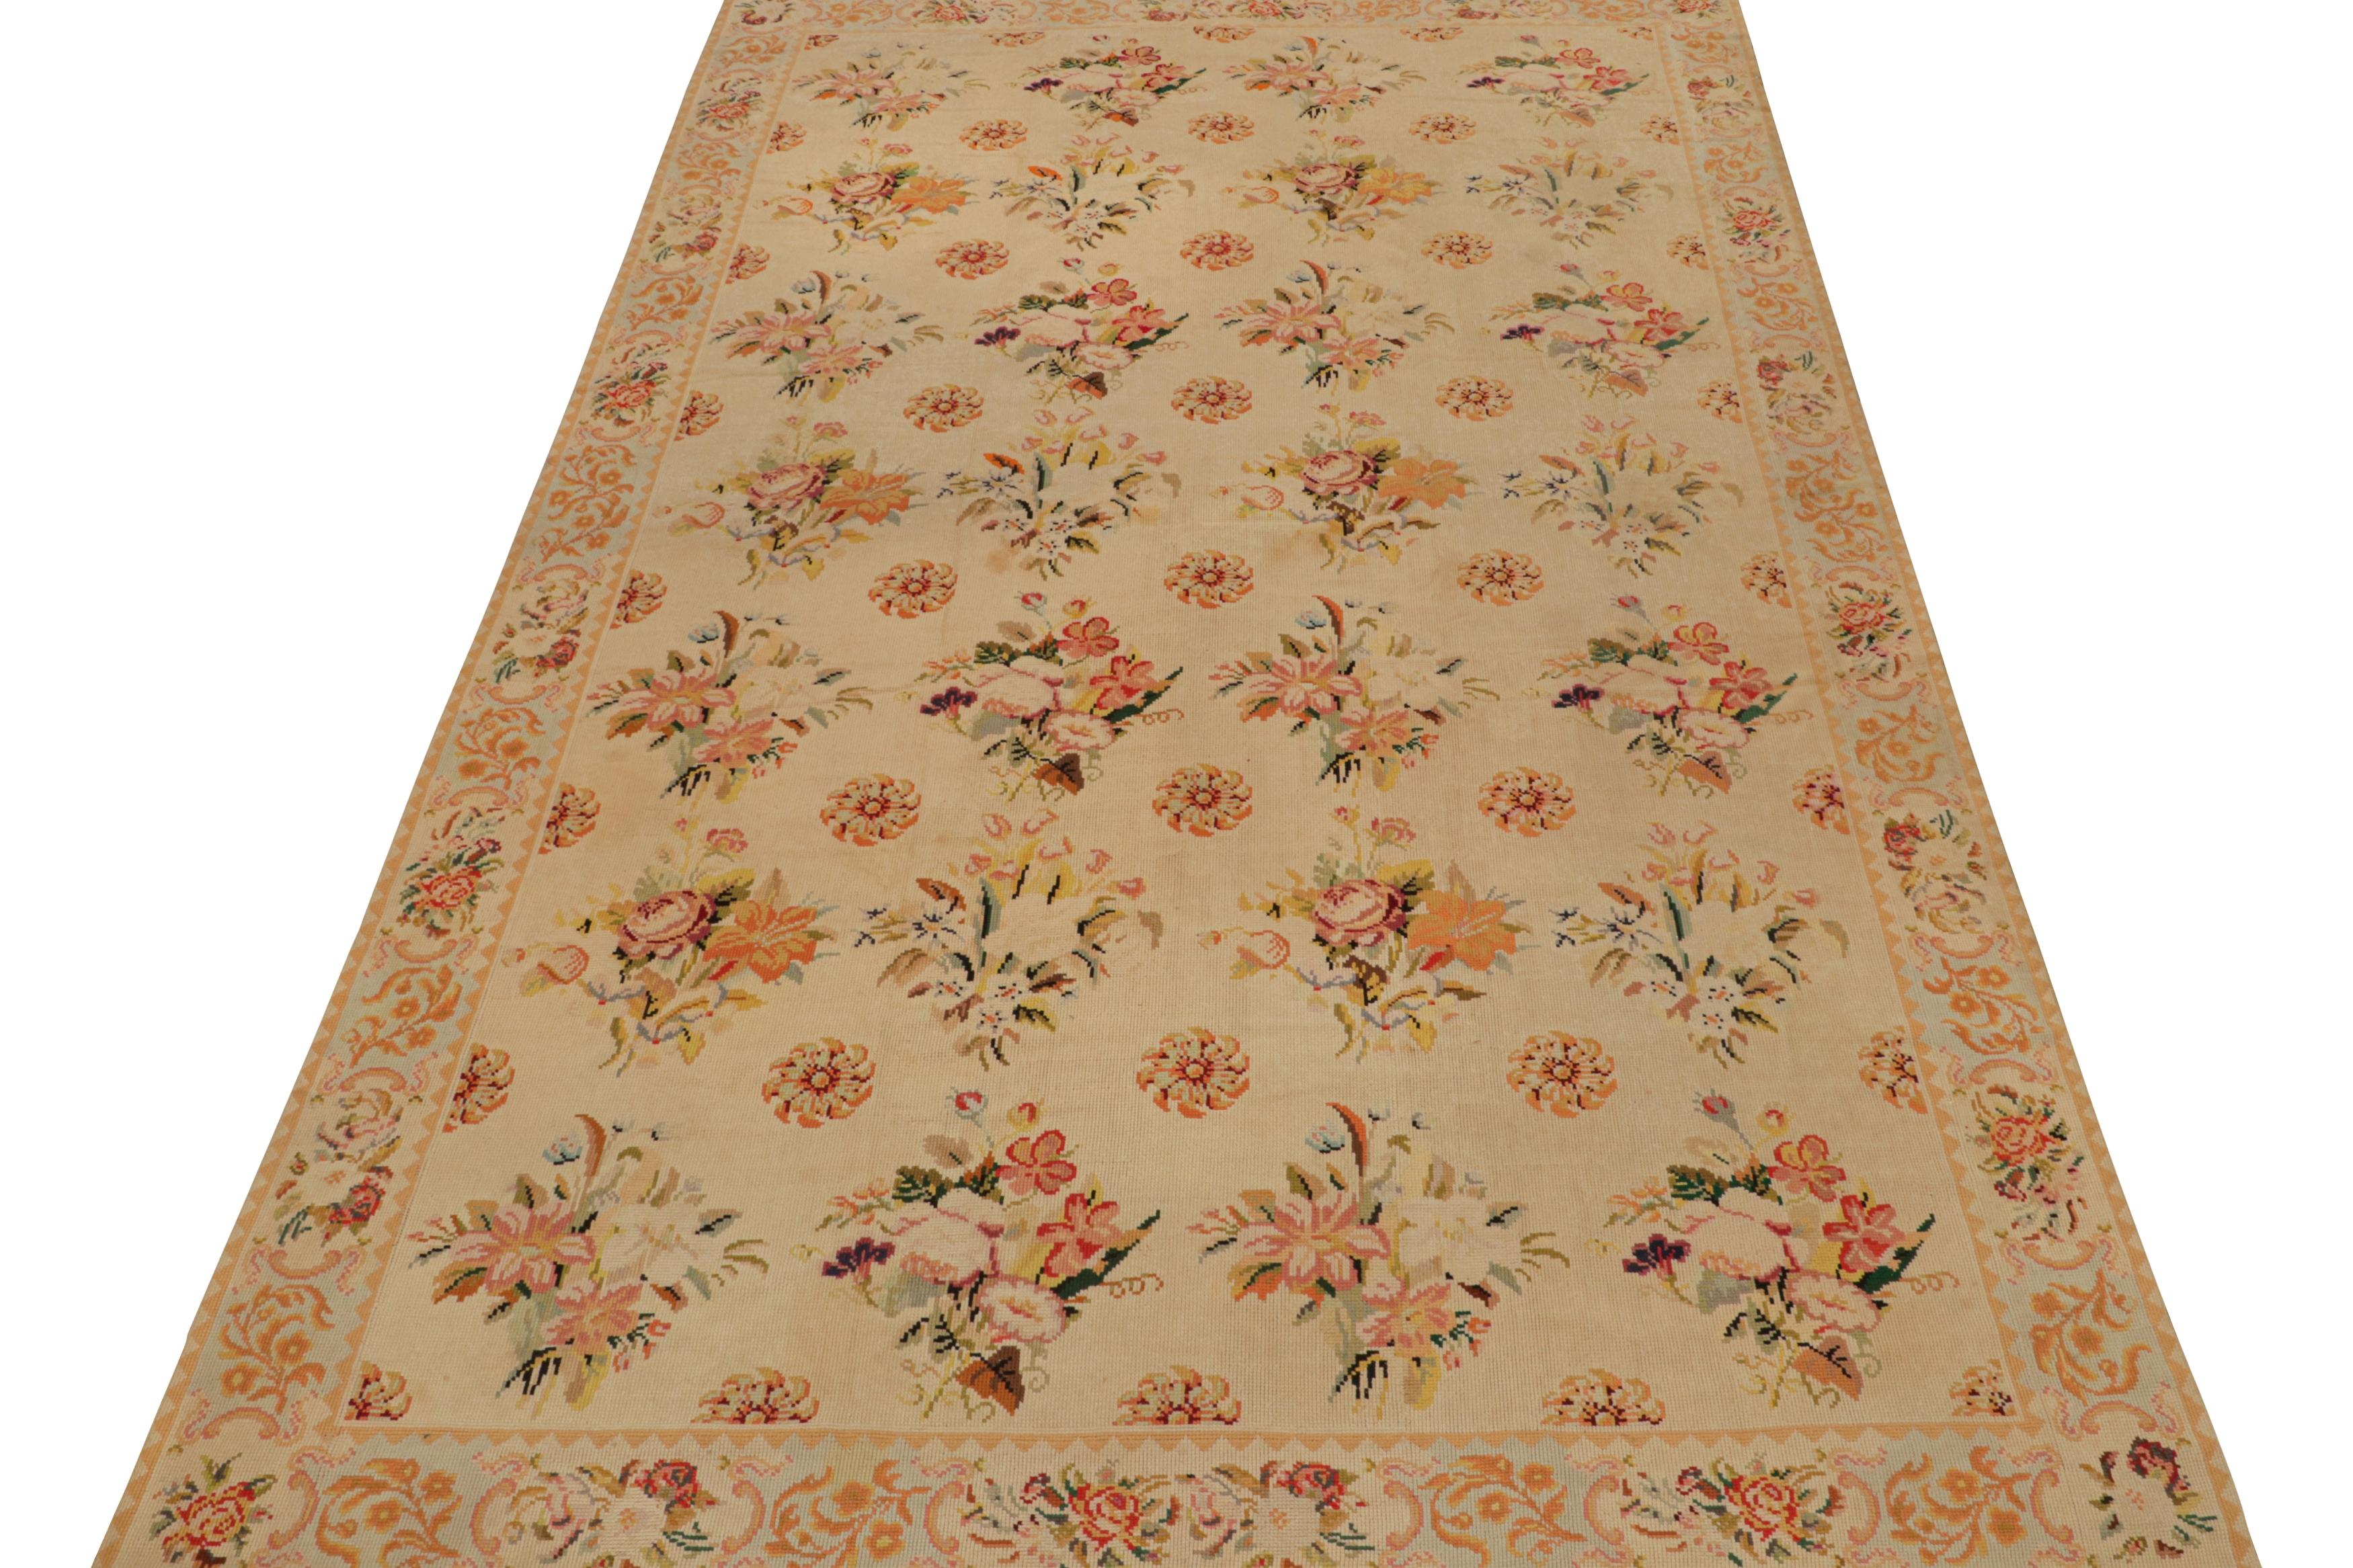 Hand-Woven Antique French Needlepoint Rug in Beige with Floral Patterns, from Rug & Kilim For Sale